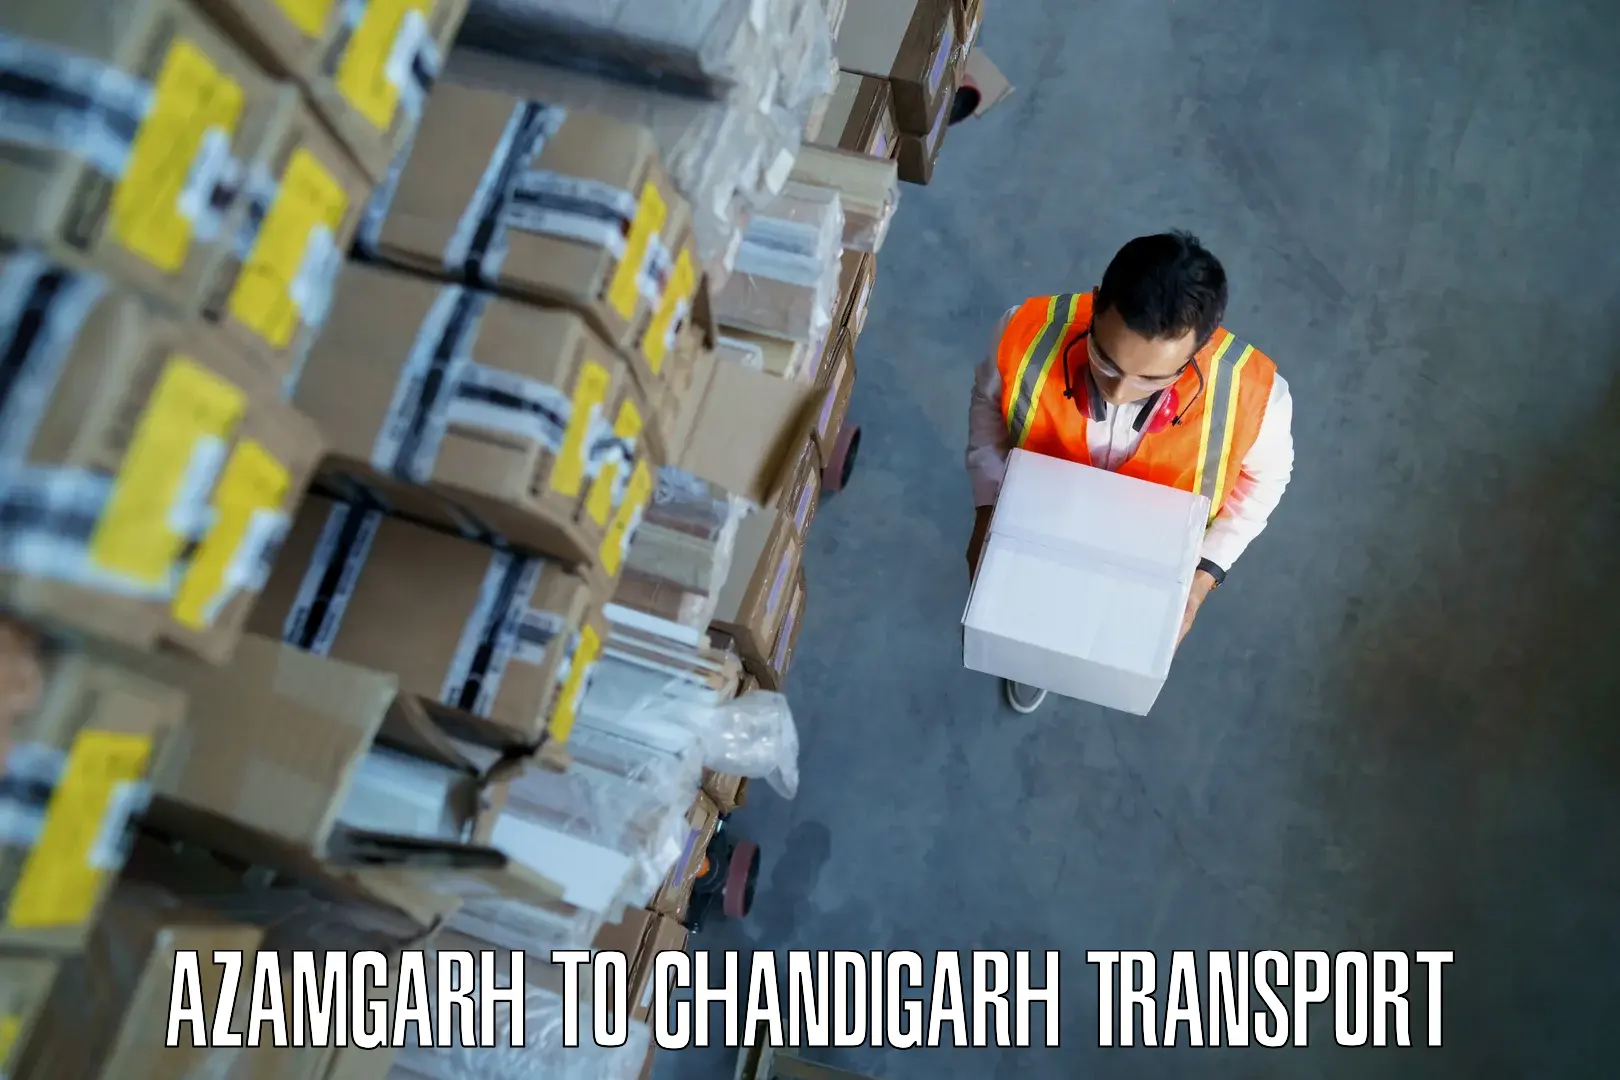 Container transport service Azamgarh to Chandigarh